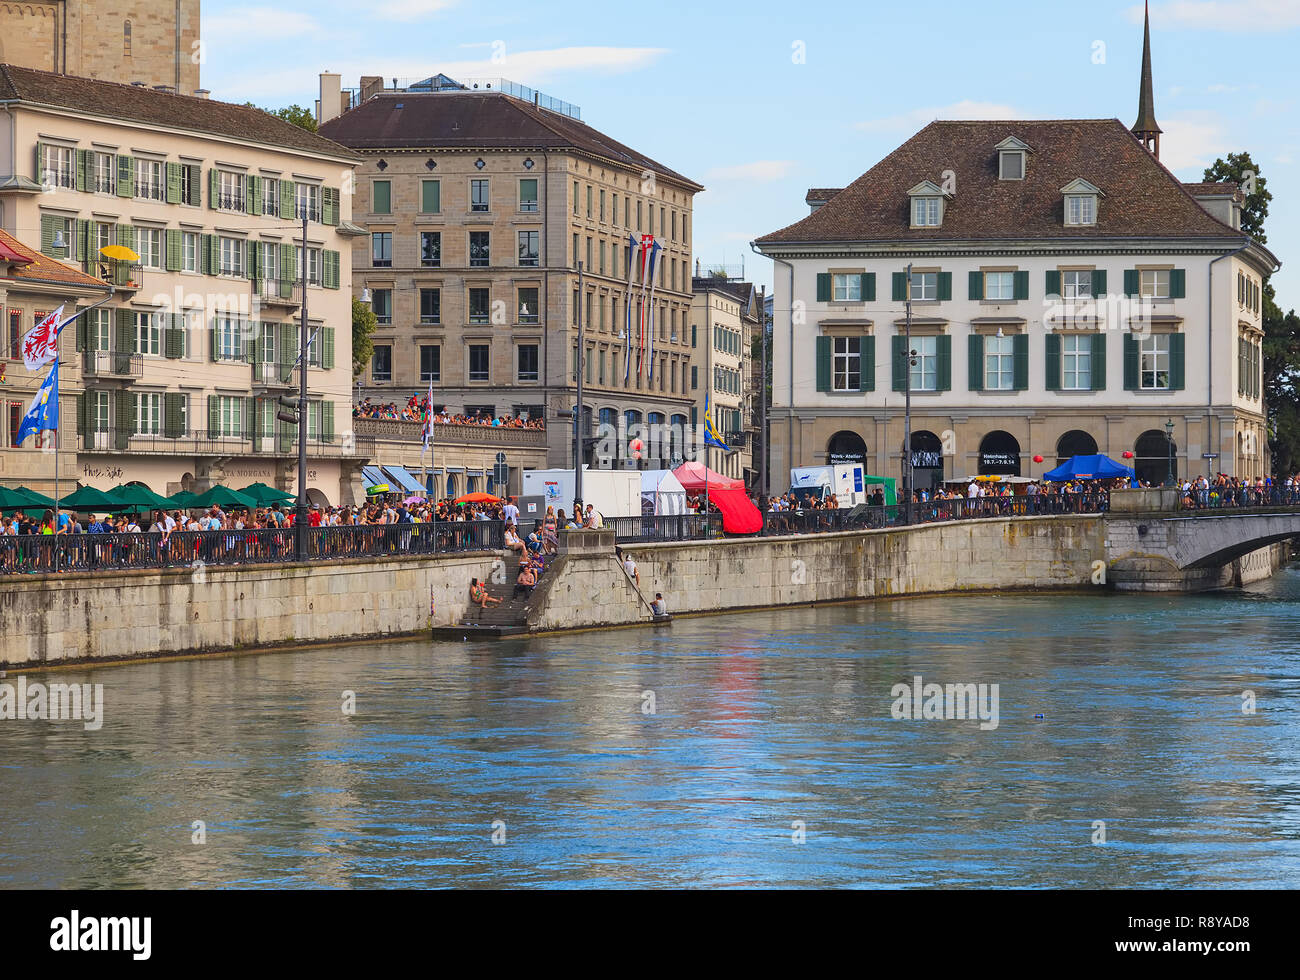 Zurich, Switzerland - August 2, 2014: embankment of the Limmat river during the Street Parade. The Street Parade is the most attended technoparade in  Stock Photo